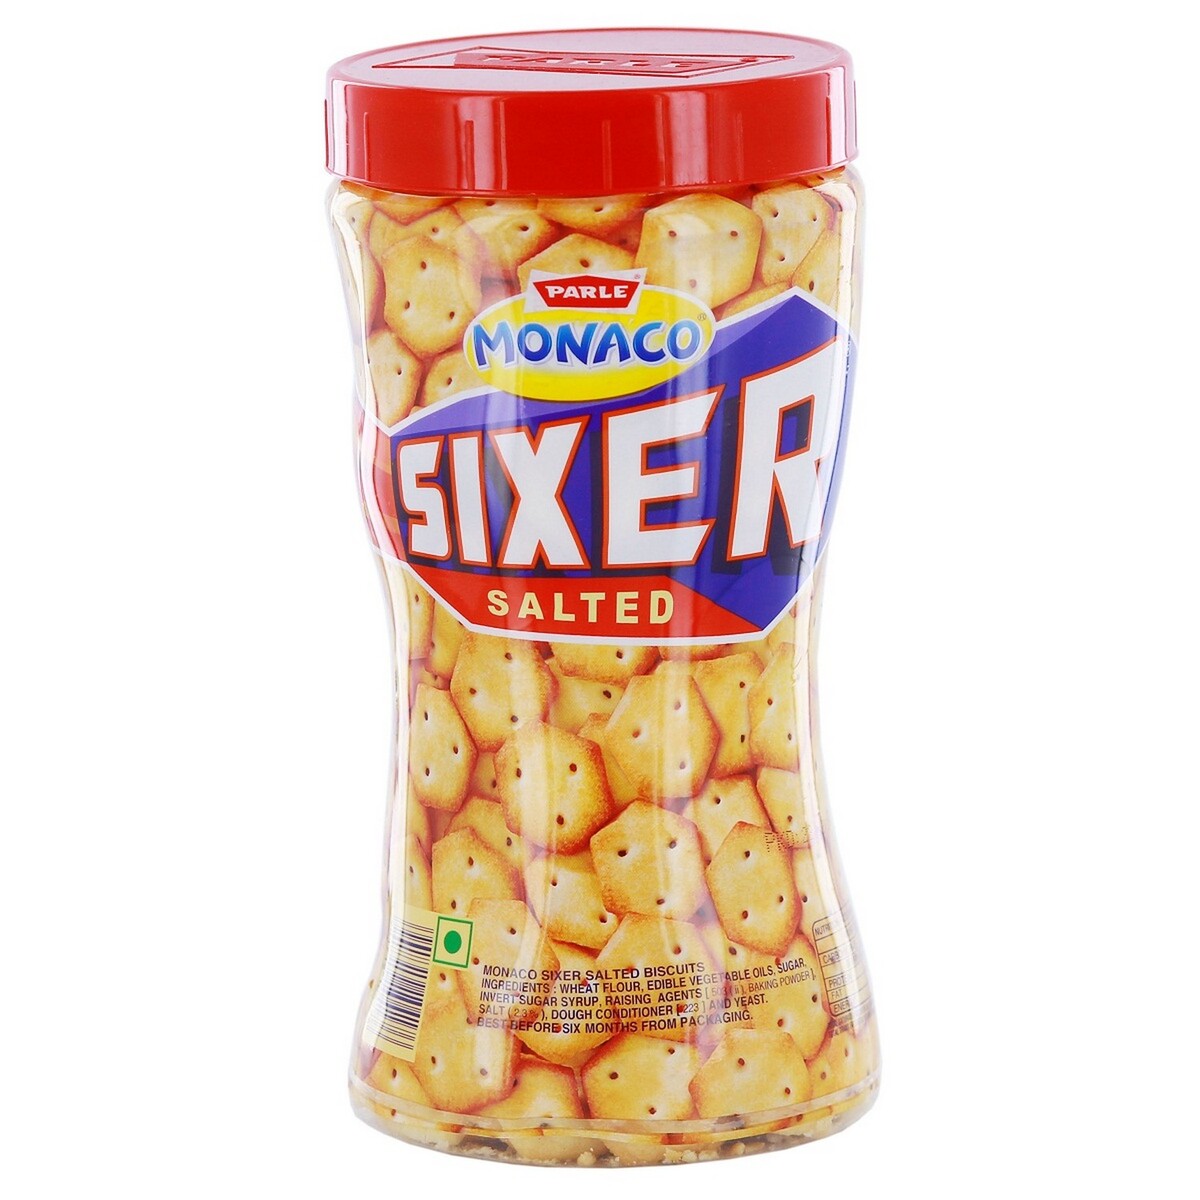 Parle Sixer Salted Biscuits Jar 200g